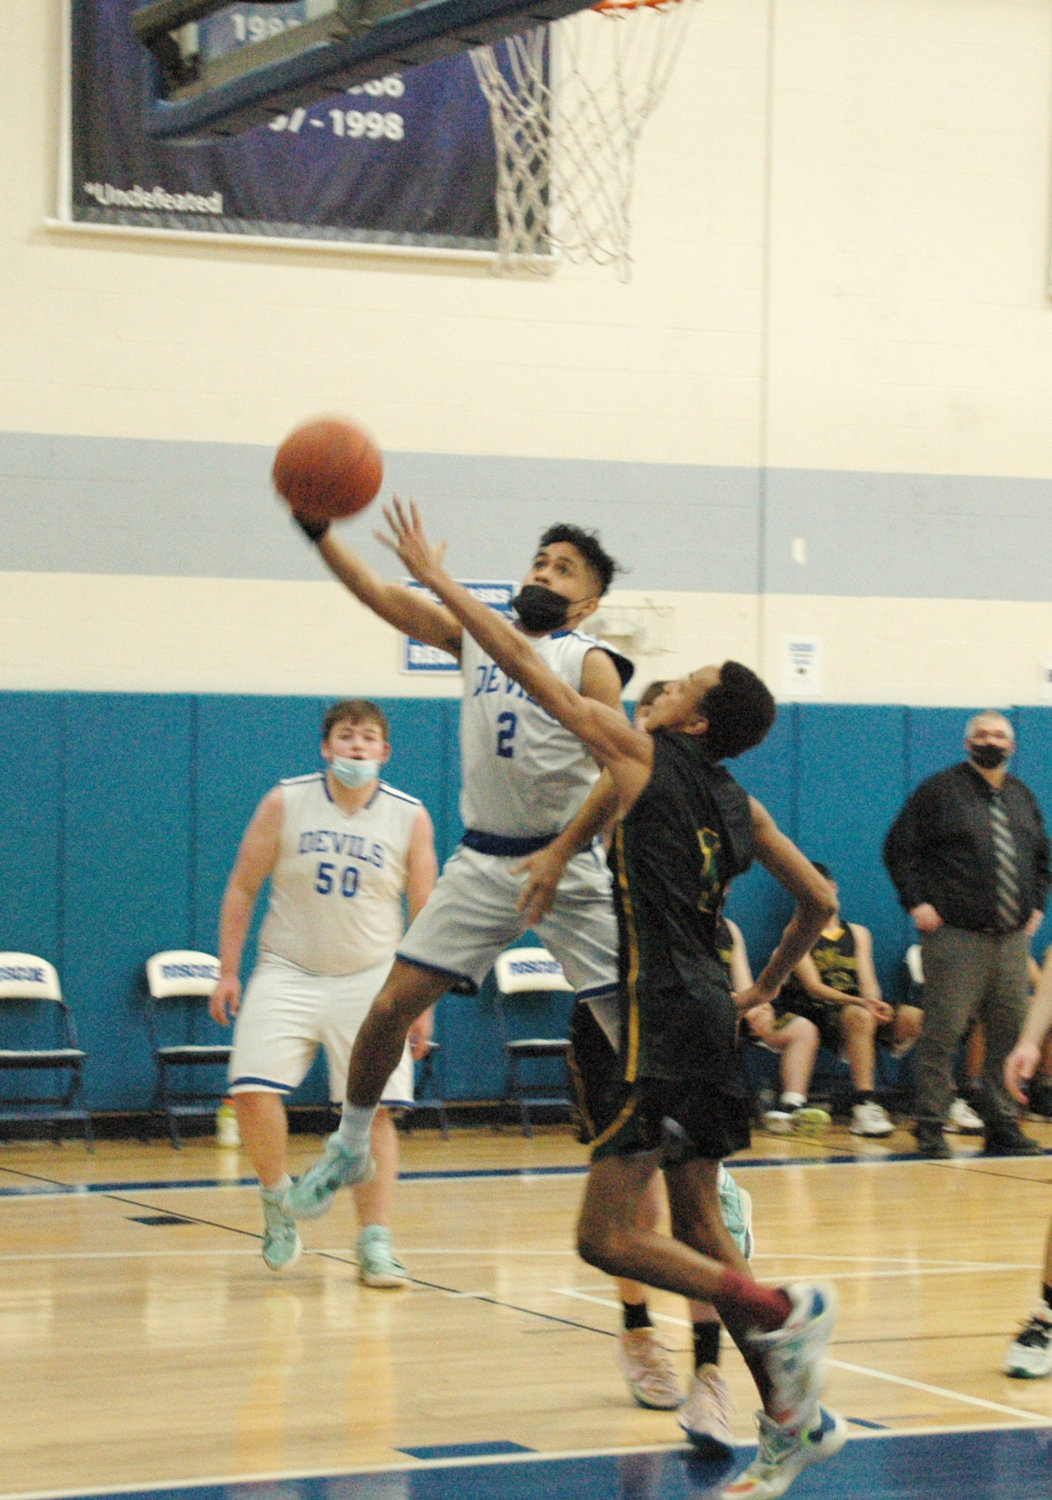 Eldred’s eighth grade standout player Trai Kaufman, seen here guarding Roscoe senior Alaniz Ruiz, led all scorers with 18 points. Ruiz netted 9 for the Blue Devils in the 69-37 league victory.